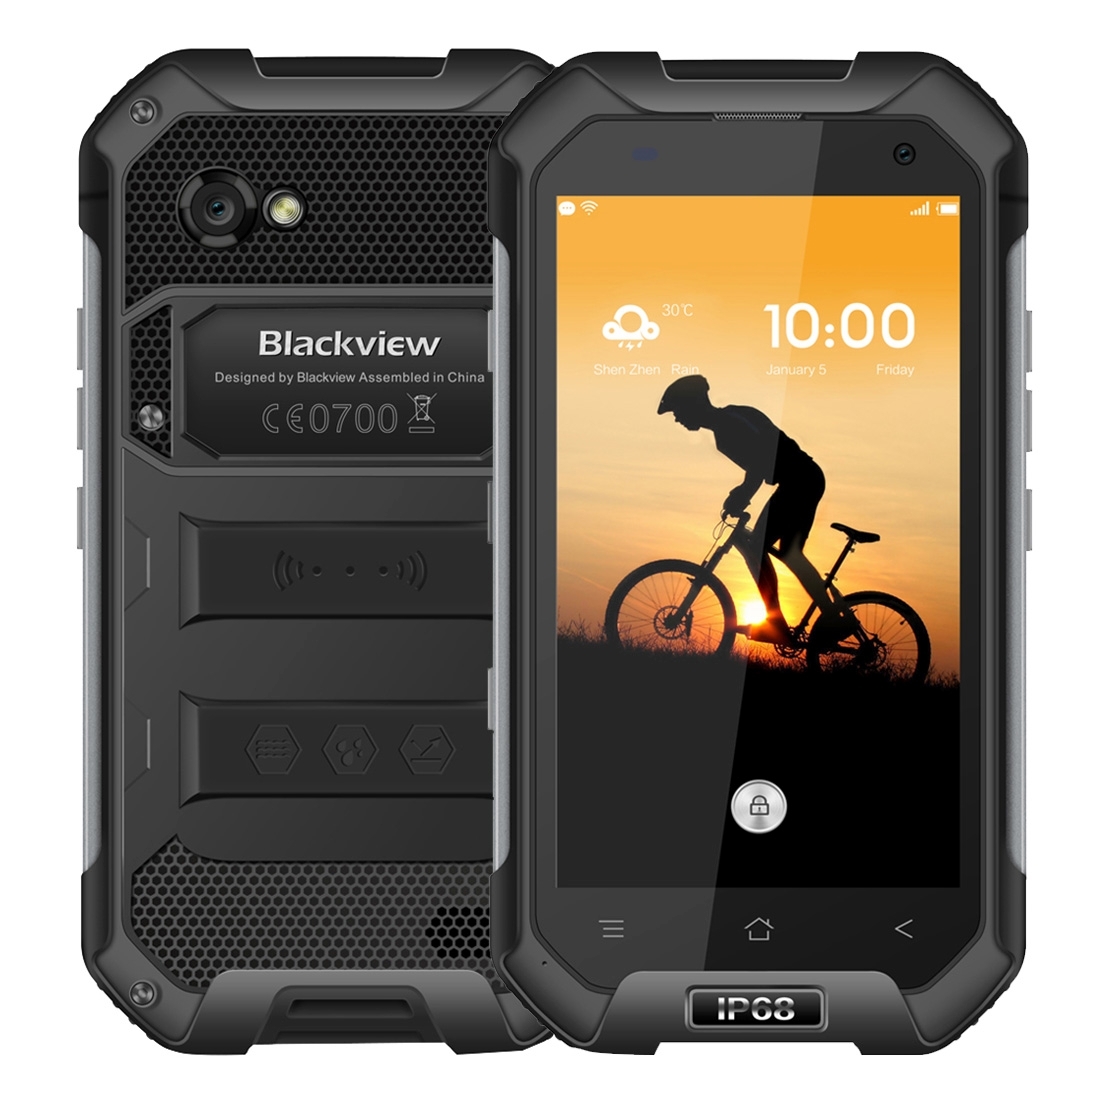 Blackview BV6000, 3GB+32GB, IP68 Waterproof Dustproof Shockproof, Double Colored, Injection Molding Technics, 4500mAh Battery, 4.7 inch Corning Gorilla Glass 3 Screen Android 7.0 MT6755 Octa-core 2.0GHz, Network: 4G